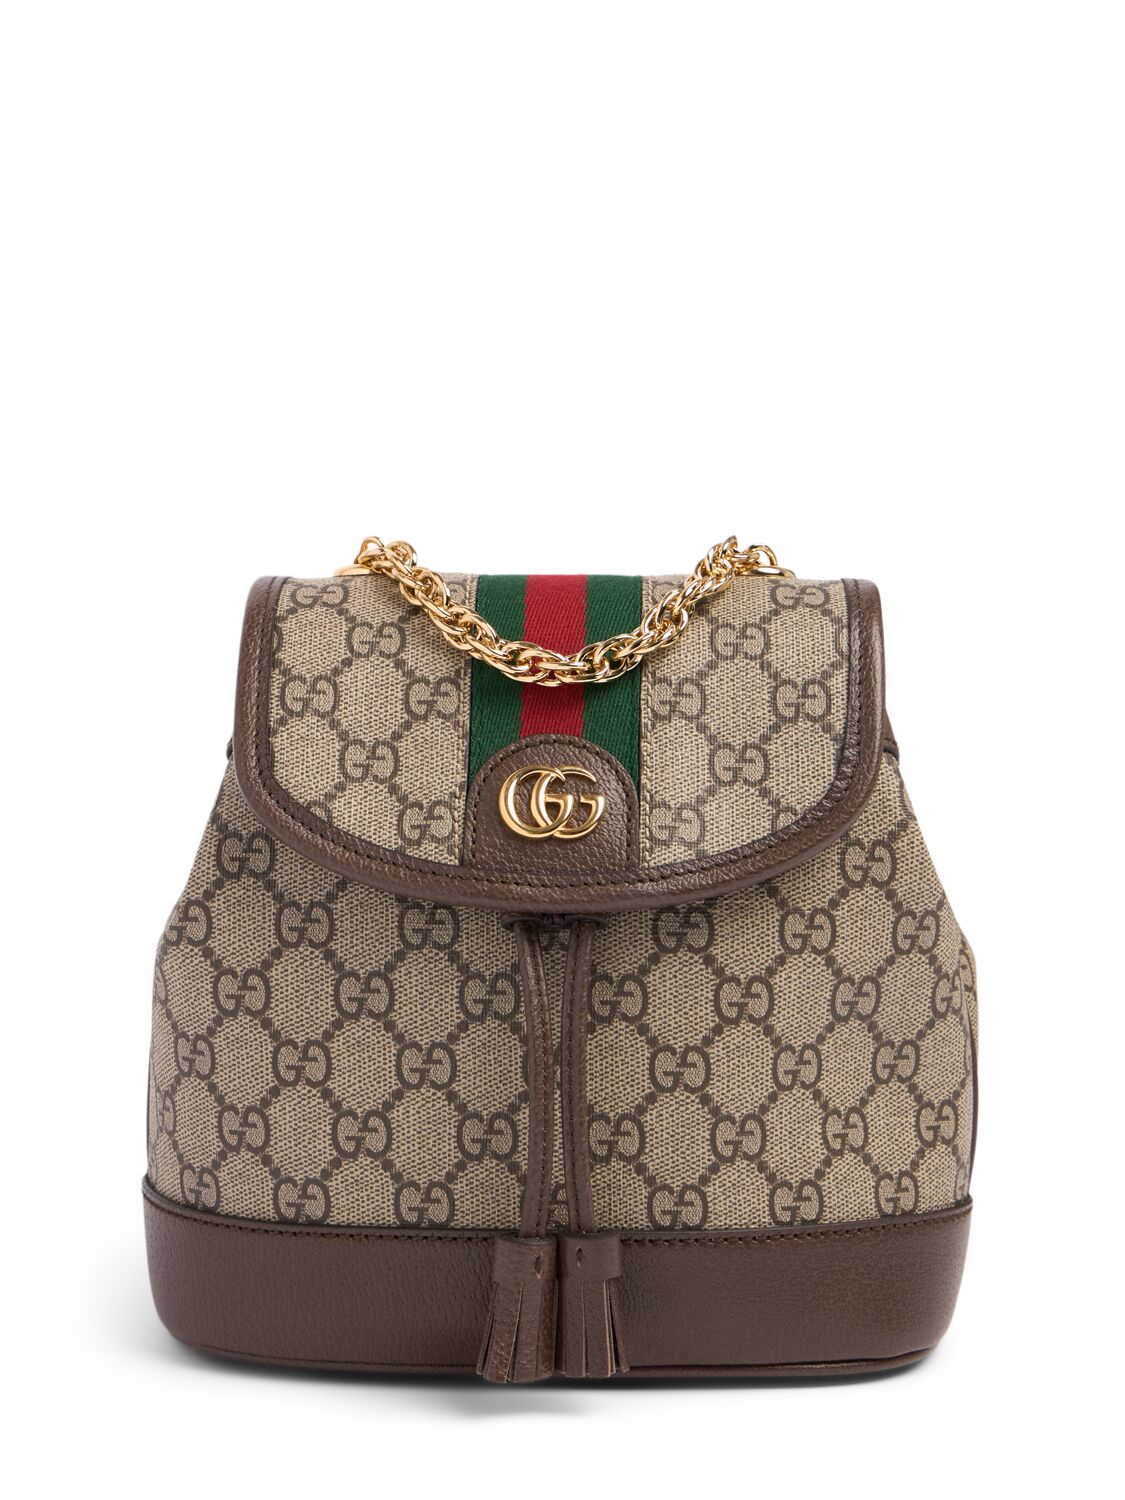 Gucci Ophidia Canvas Backpack In Brown